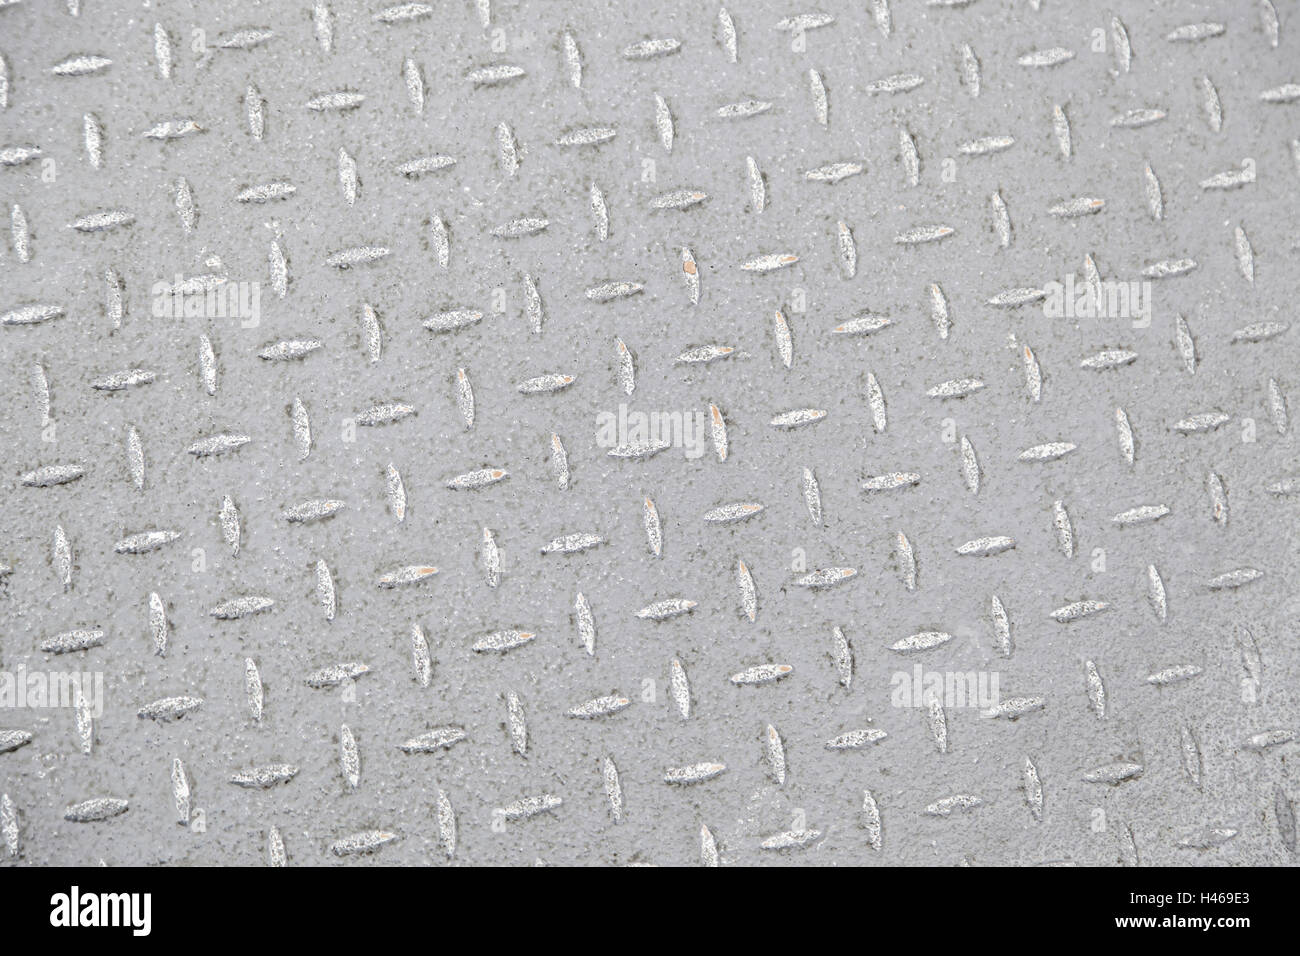 Riveted metal background, detail metal textured background Stock Photo